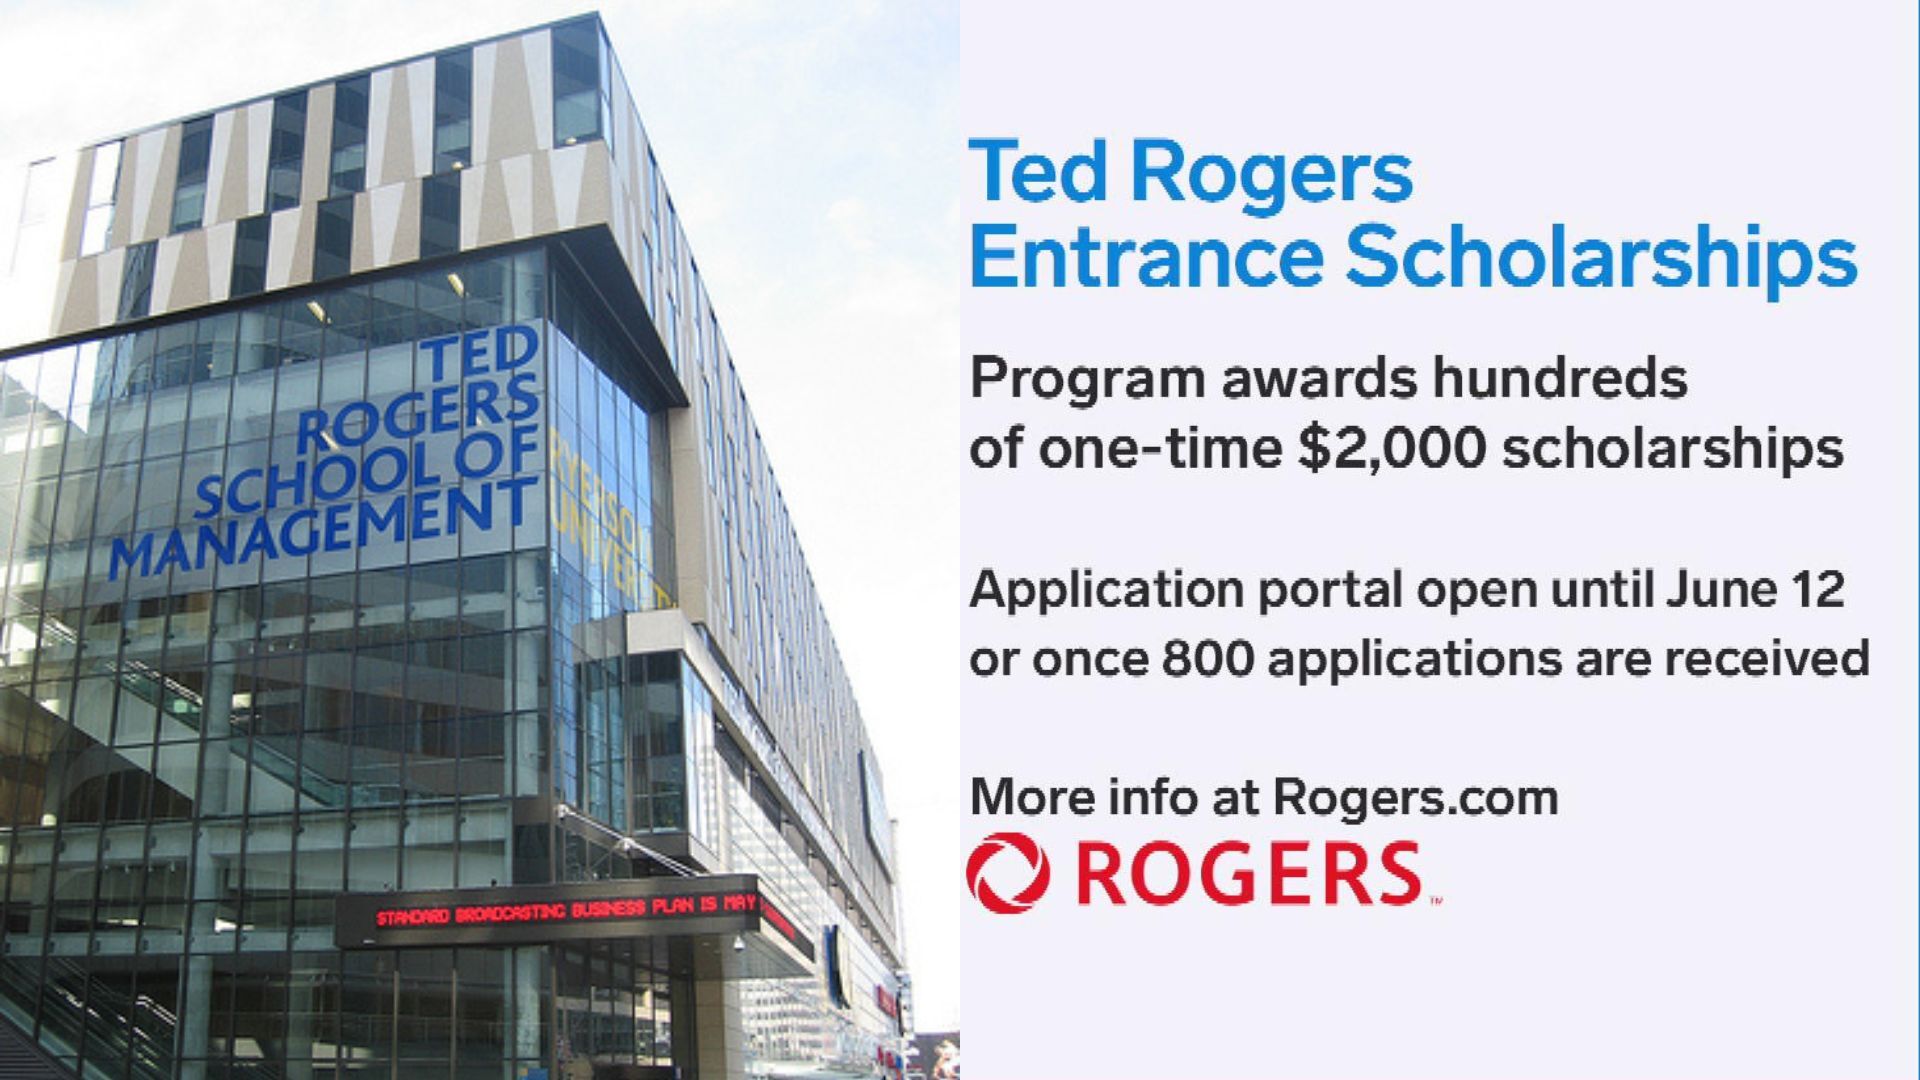 Students can get $2000 of their tuition covered with the Ted Rogers Entrance Scholarship